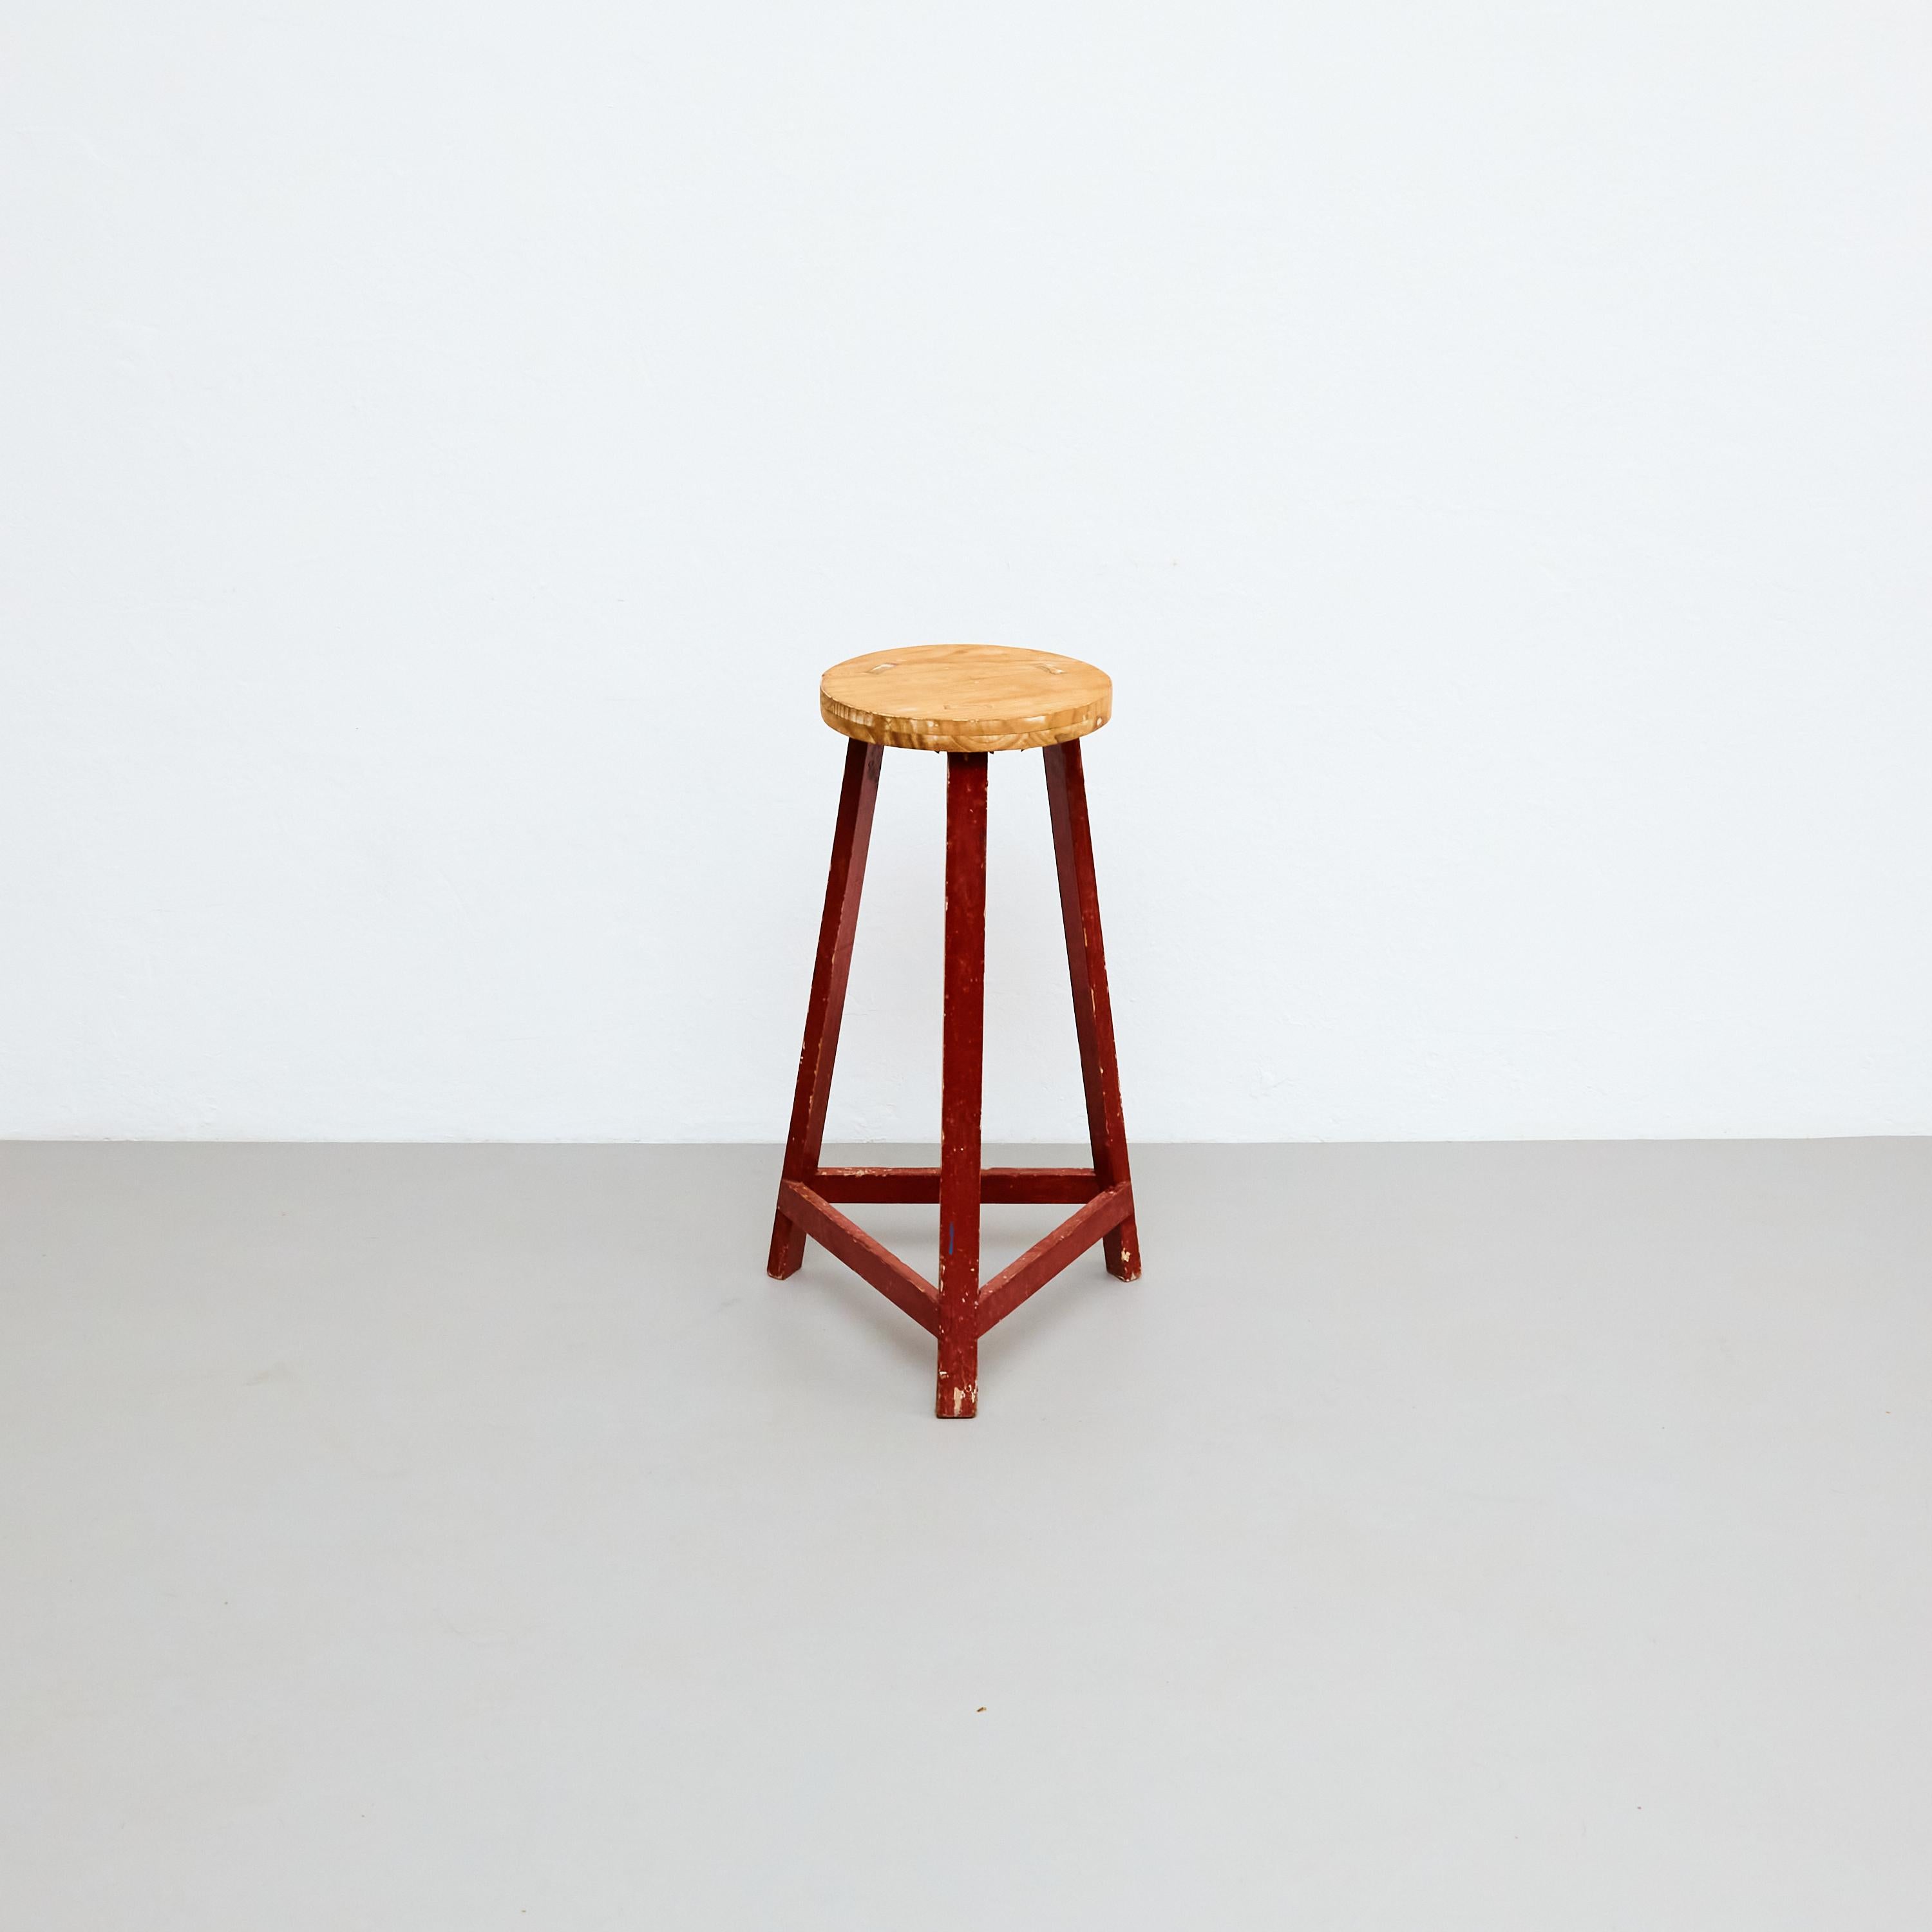 Mid-Century Modern Rationalist Wood High Stool, by unknown designer.

Embrace the timeless style of this Mid-Century Modern rationalist wood high stool, designed by an unknown designer and manufactured in France circa 1950. The stool showcases a